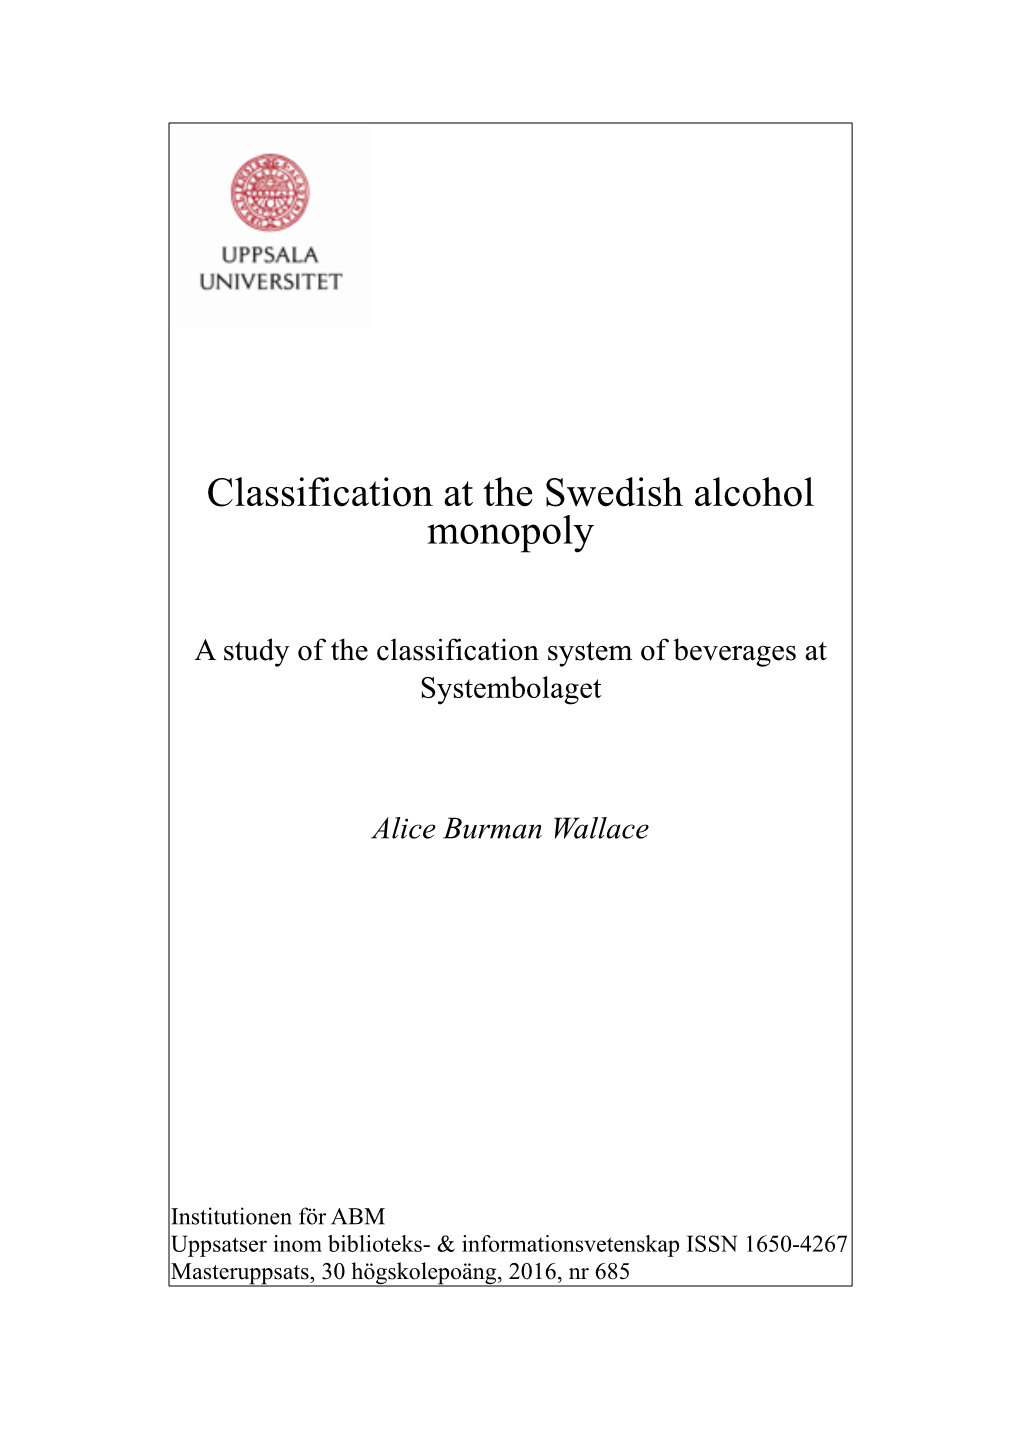 Classification at the Swedish Alcohol Monopoly